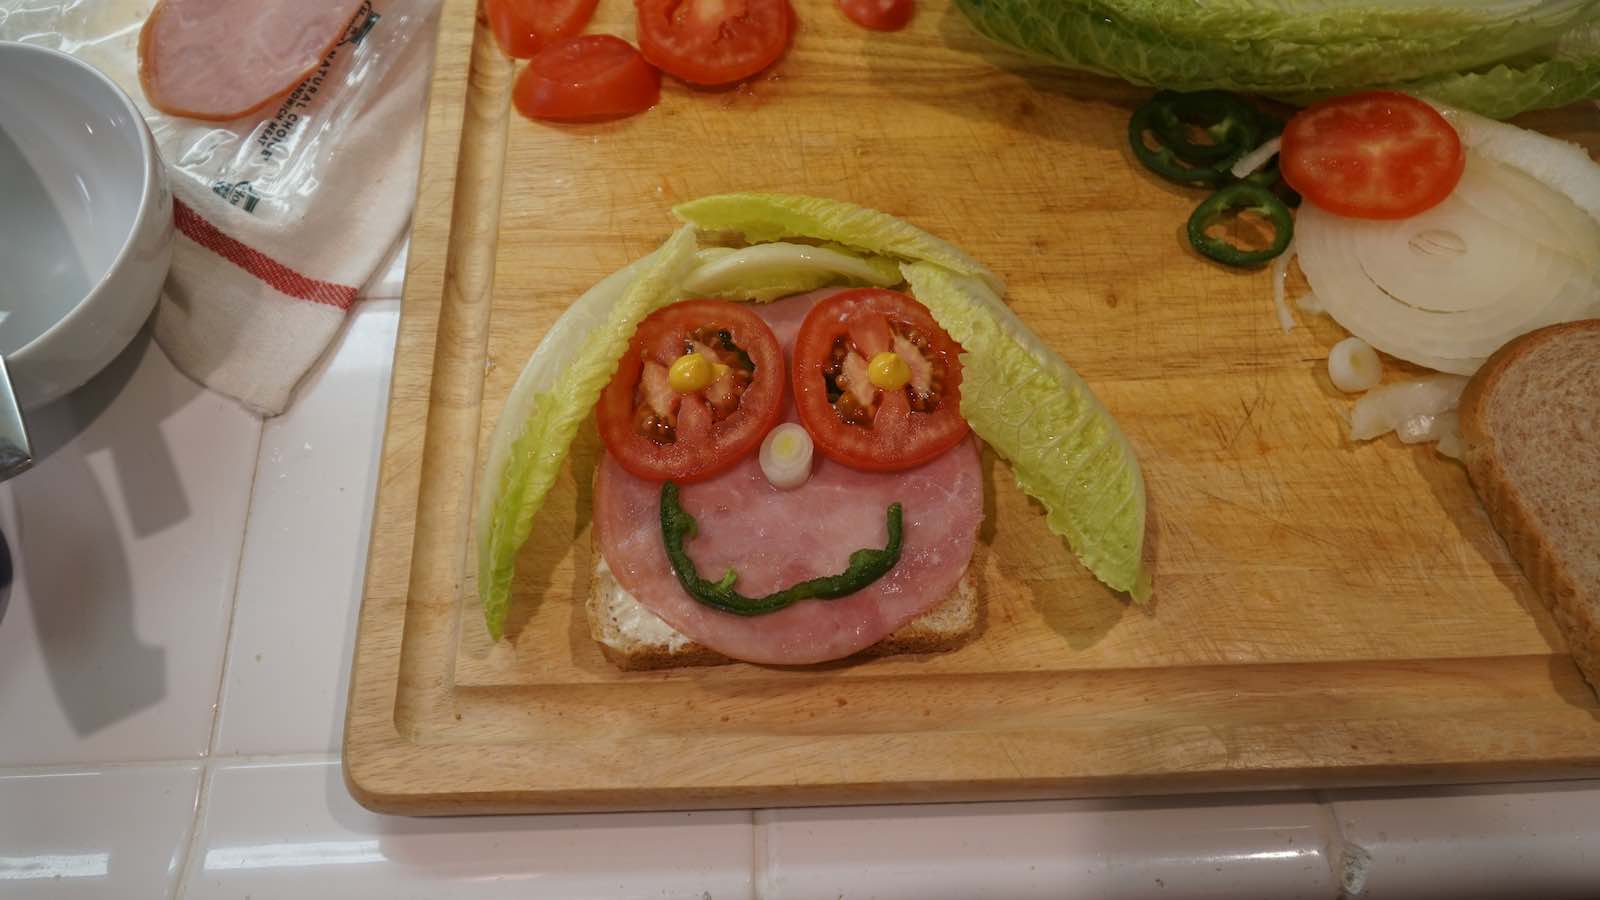 A week ago I was taking my sweet time making sandwiches. I started to play around and make faces in them and ended up laughing so hard by myself in the kitchen. An hour later I had made a bunch of different ones and took photos of them all. Living in the present or slightly delusional? You can decide, but it was hilarious.